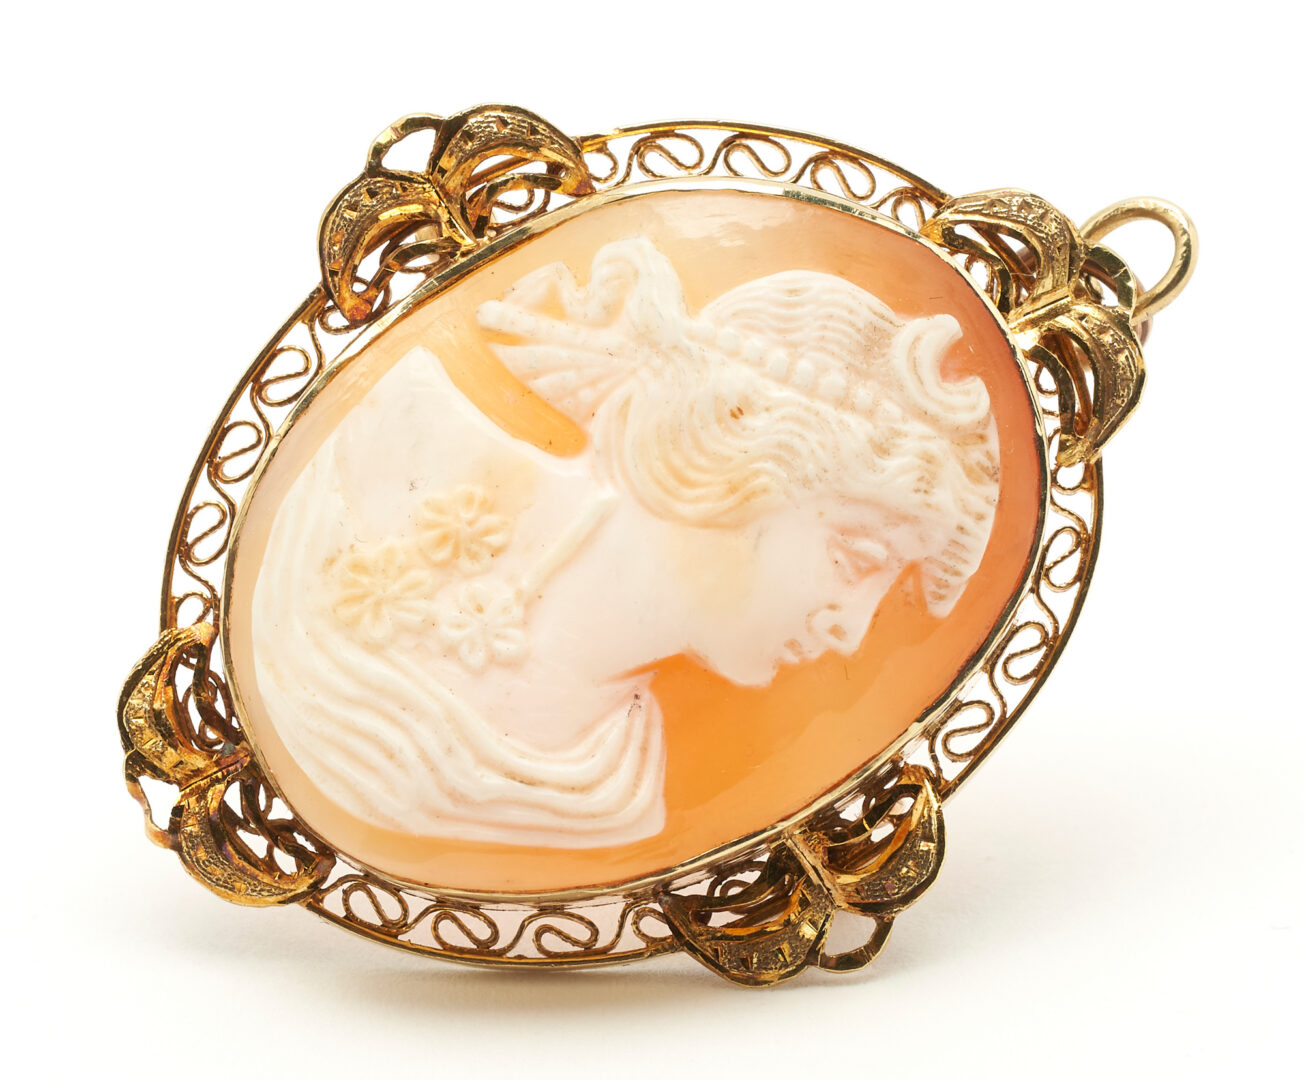 Lot 989: 4 Ladies Gold Jewelry Items, incl. Cameo